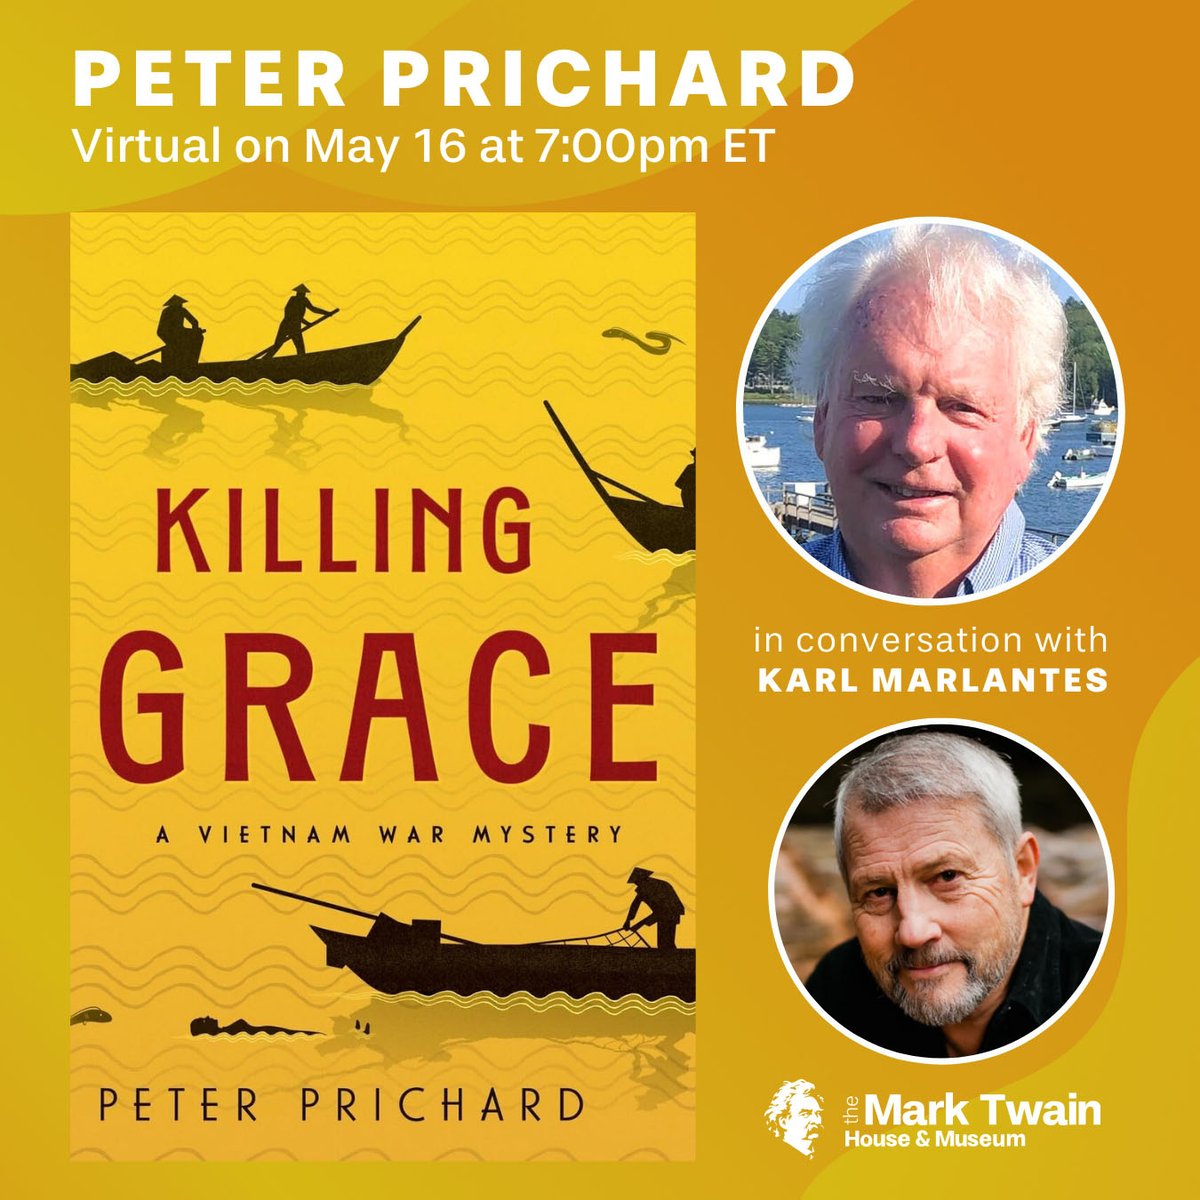 THIS THURSDAY! May 16 at 7:00pm ET - KILLING GRACE: A VIETNAM WAR MYSTERY (Virtual)  

Choose your own price for non-members. Free for MTH&M members. Learn more & REGISTER HERE: marktwainhouse.org/event/killing-…

#Vietnam #VietnamWar #Books #UShistory